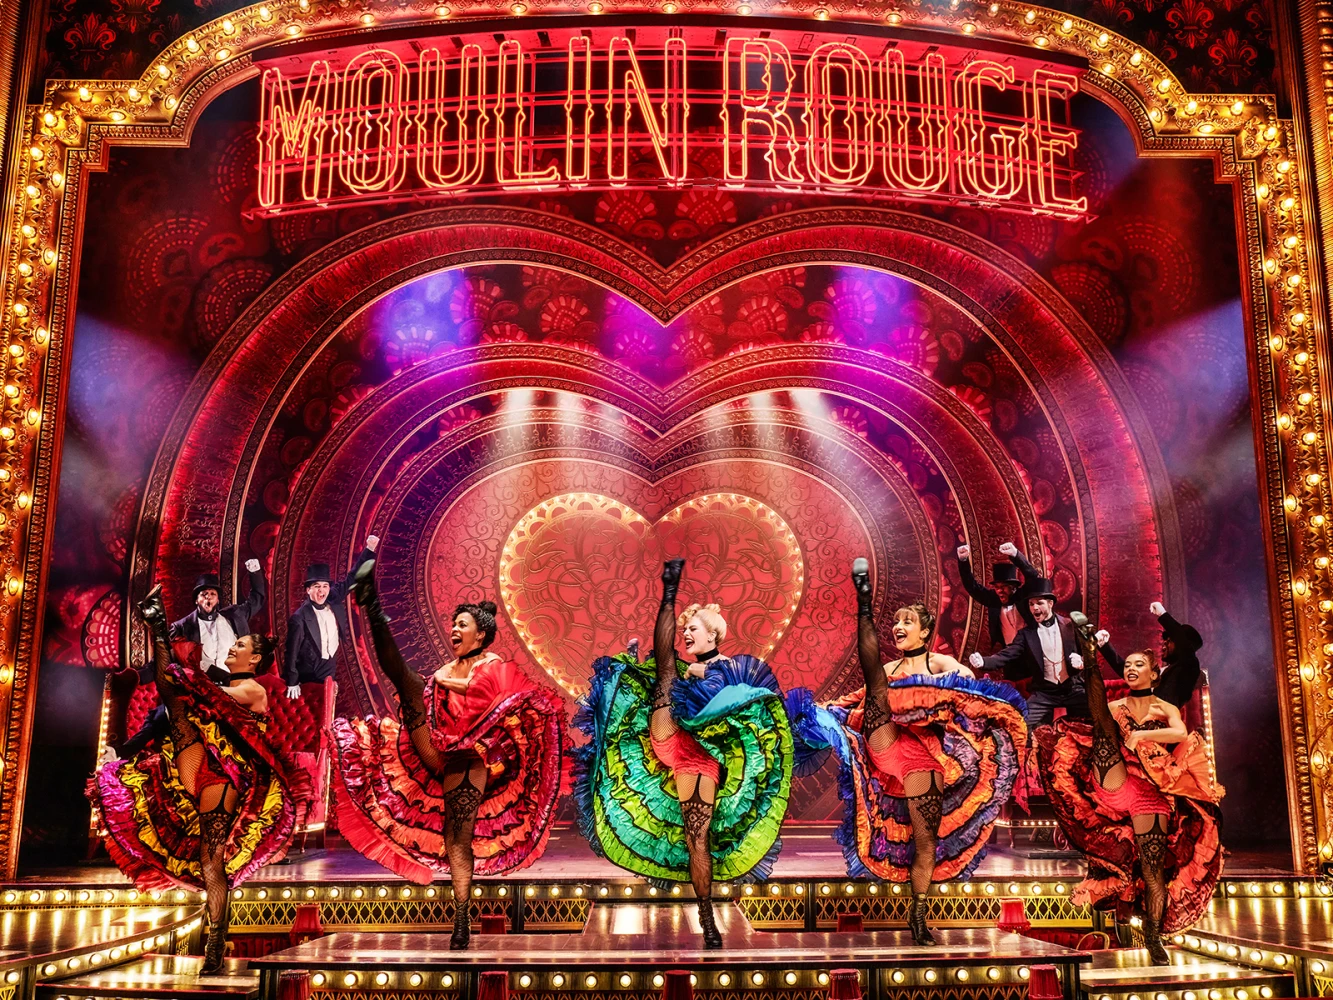 Moulin Rouge! The Musical: What to expect - 5